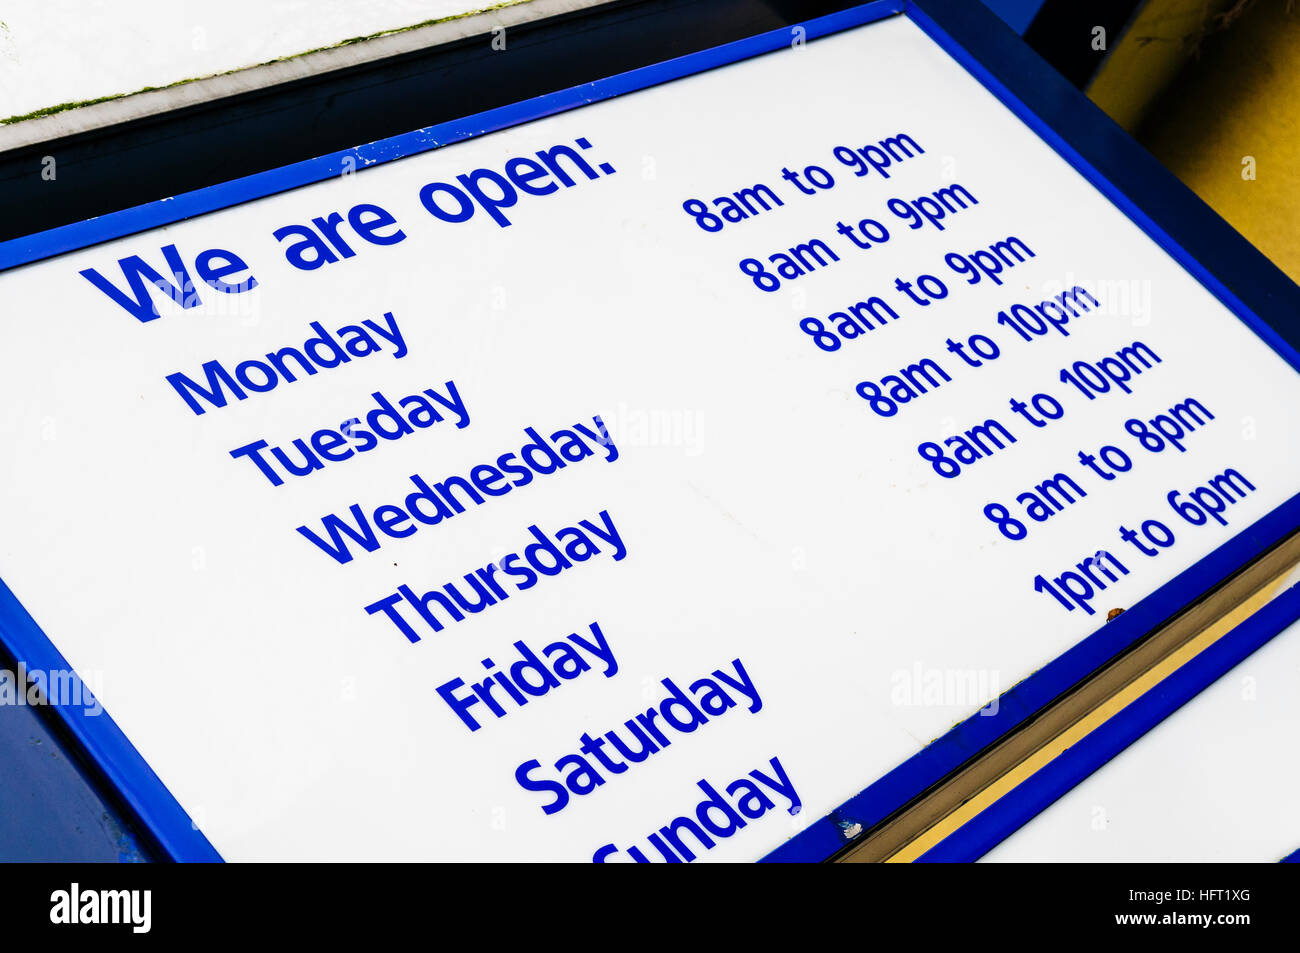 Opening hours at a supermarket Stock Photo